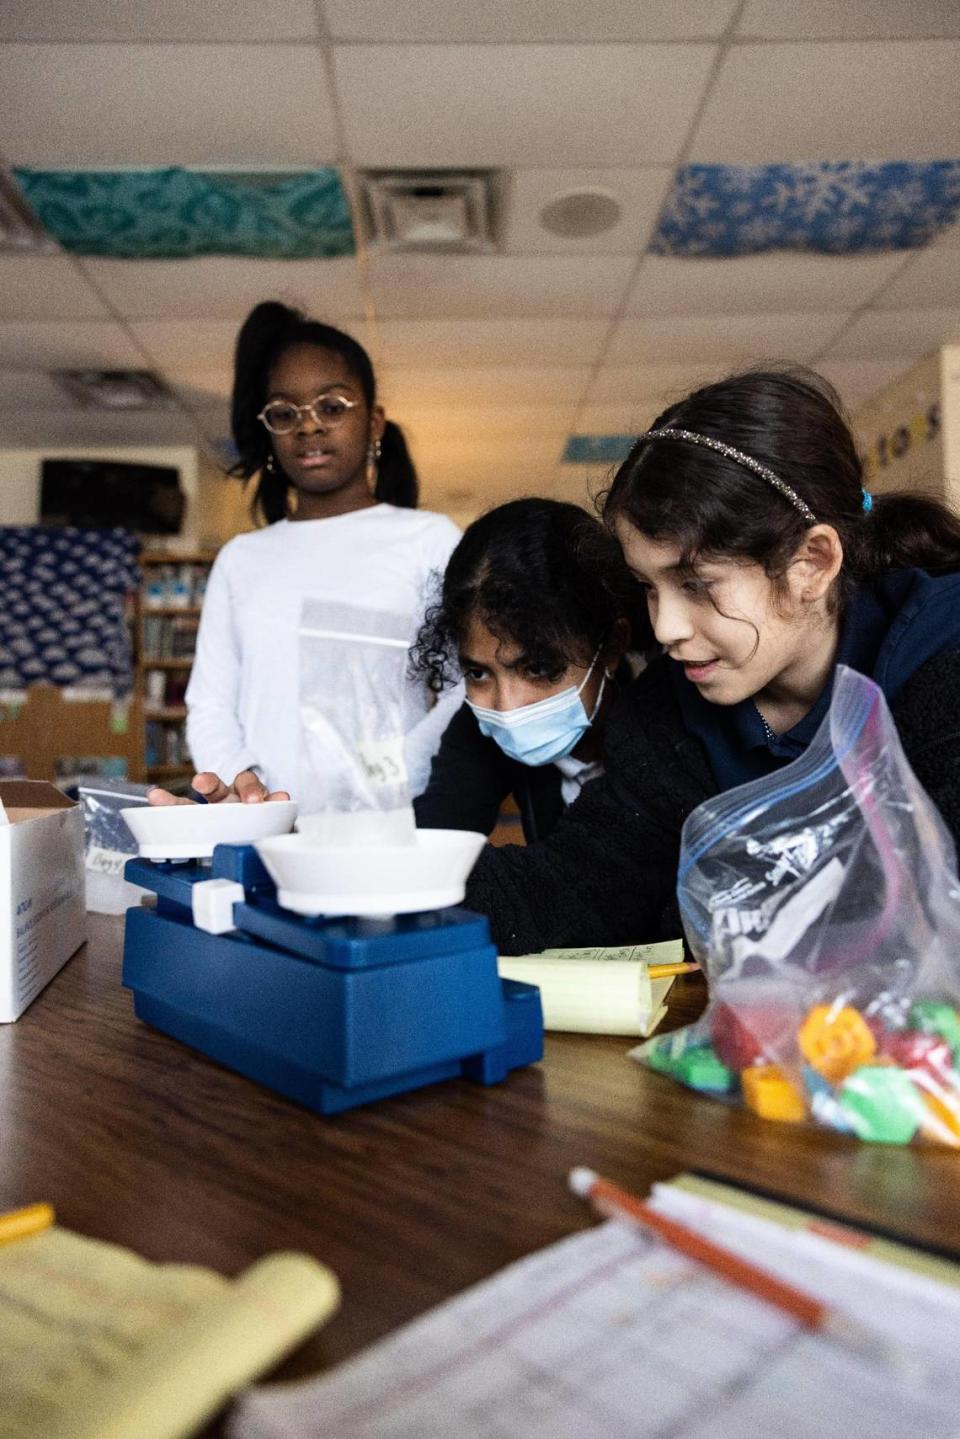 Kyra Baker, 10, from left, Evelyn Mendoza, 11, and Brianna Funez, 11, use a scale during science tutoring at Joseph W. Grier Academy in Charlotte, N.C., on Thursday, March 9, 2023.